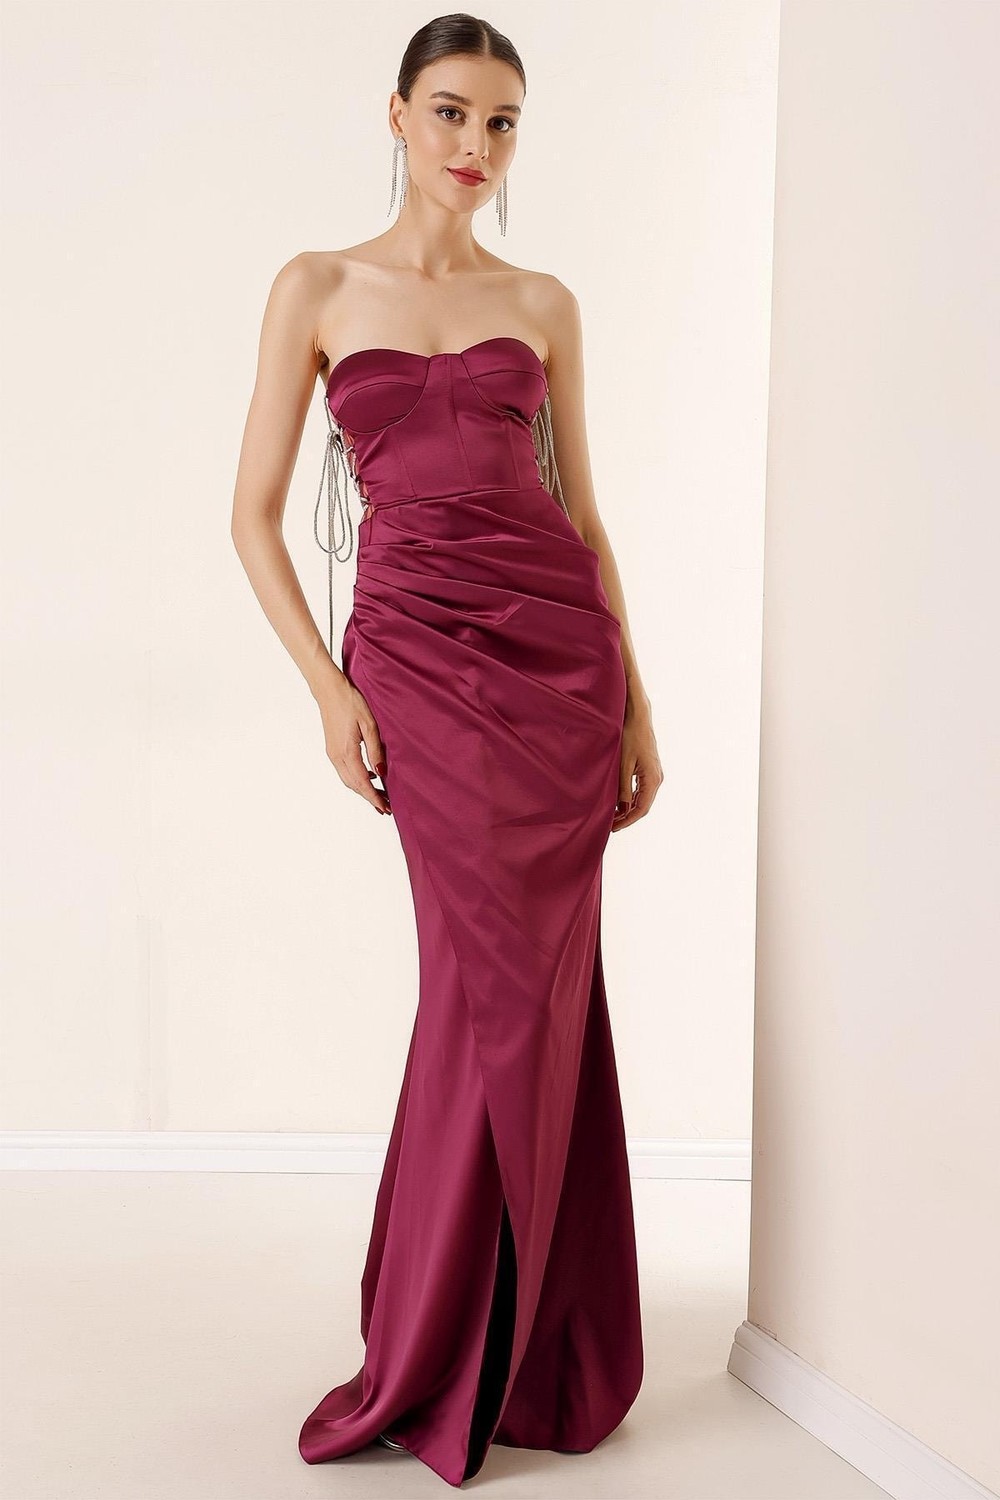 By Saygı Lined Long Chiffon Dress with Shiny Threads and Transparent Drapes Plum